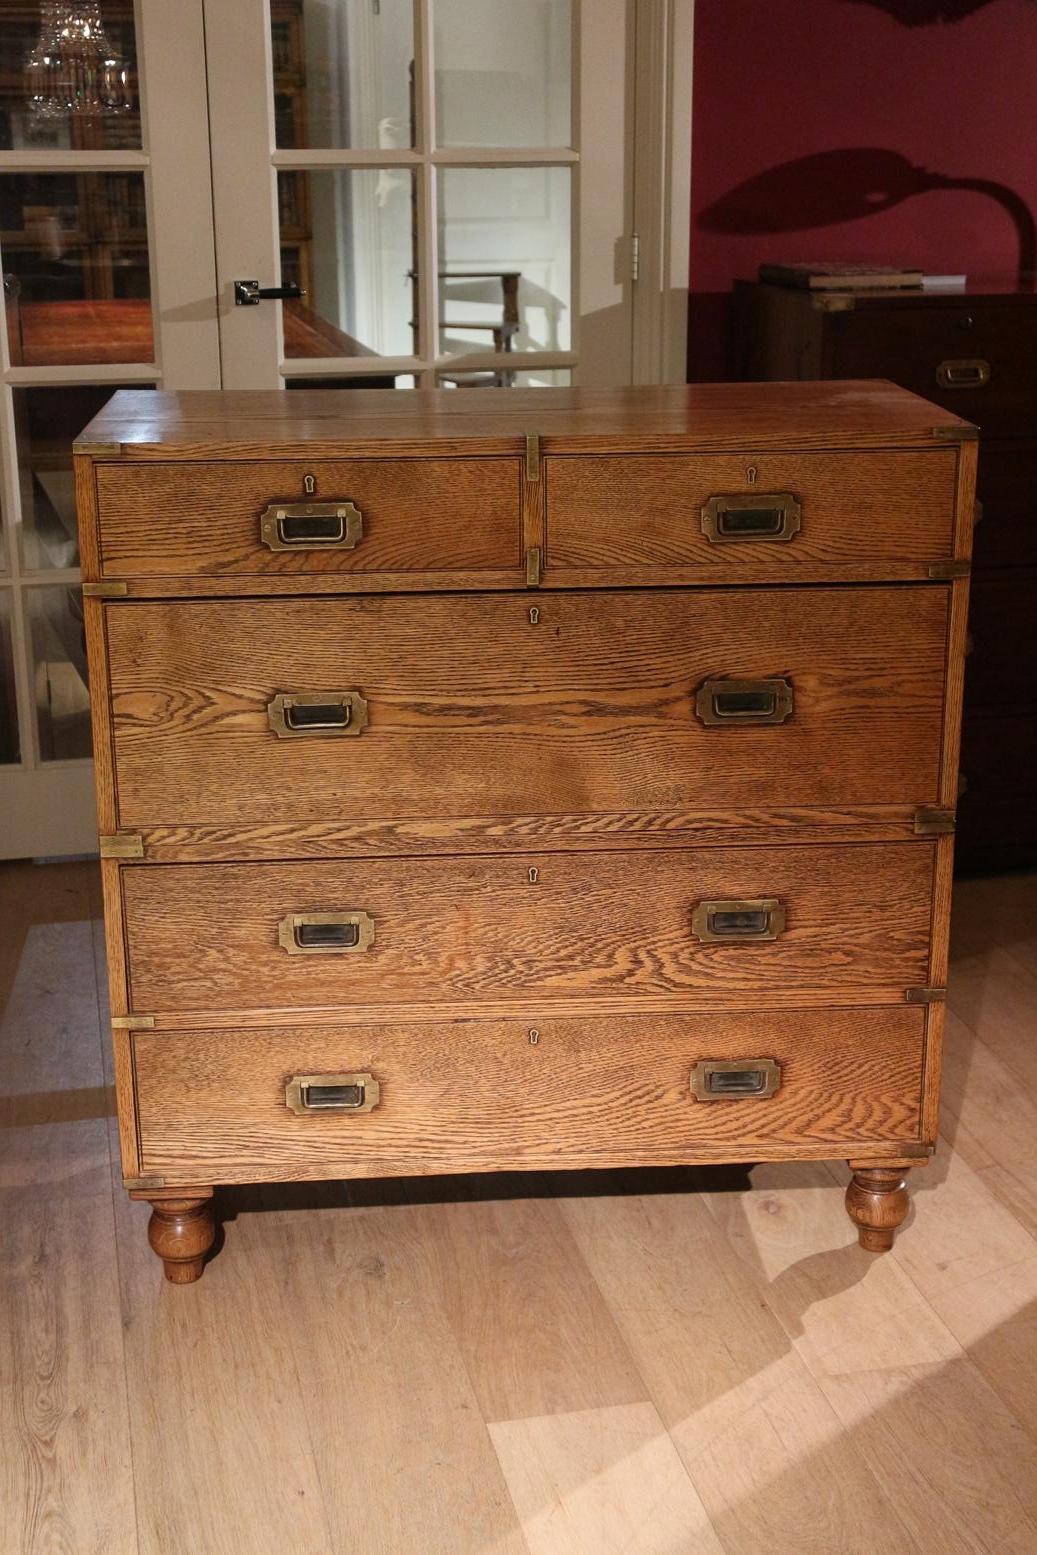 Great Britain (UK) 19th Century Oak Victorian Campaign Chest of Drawers